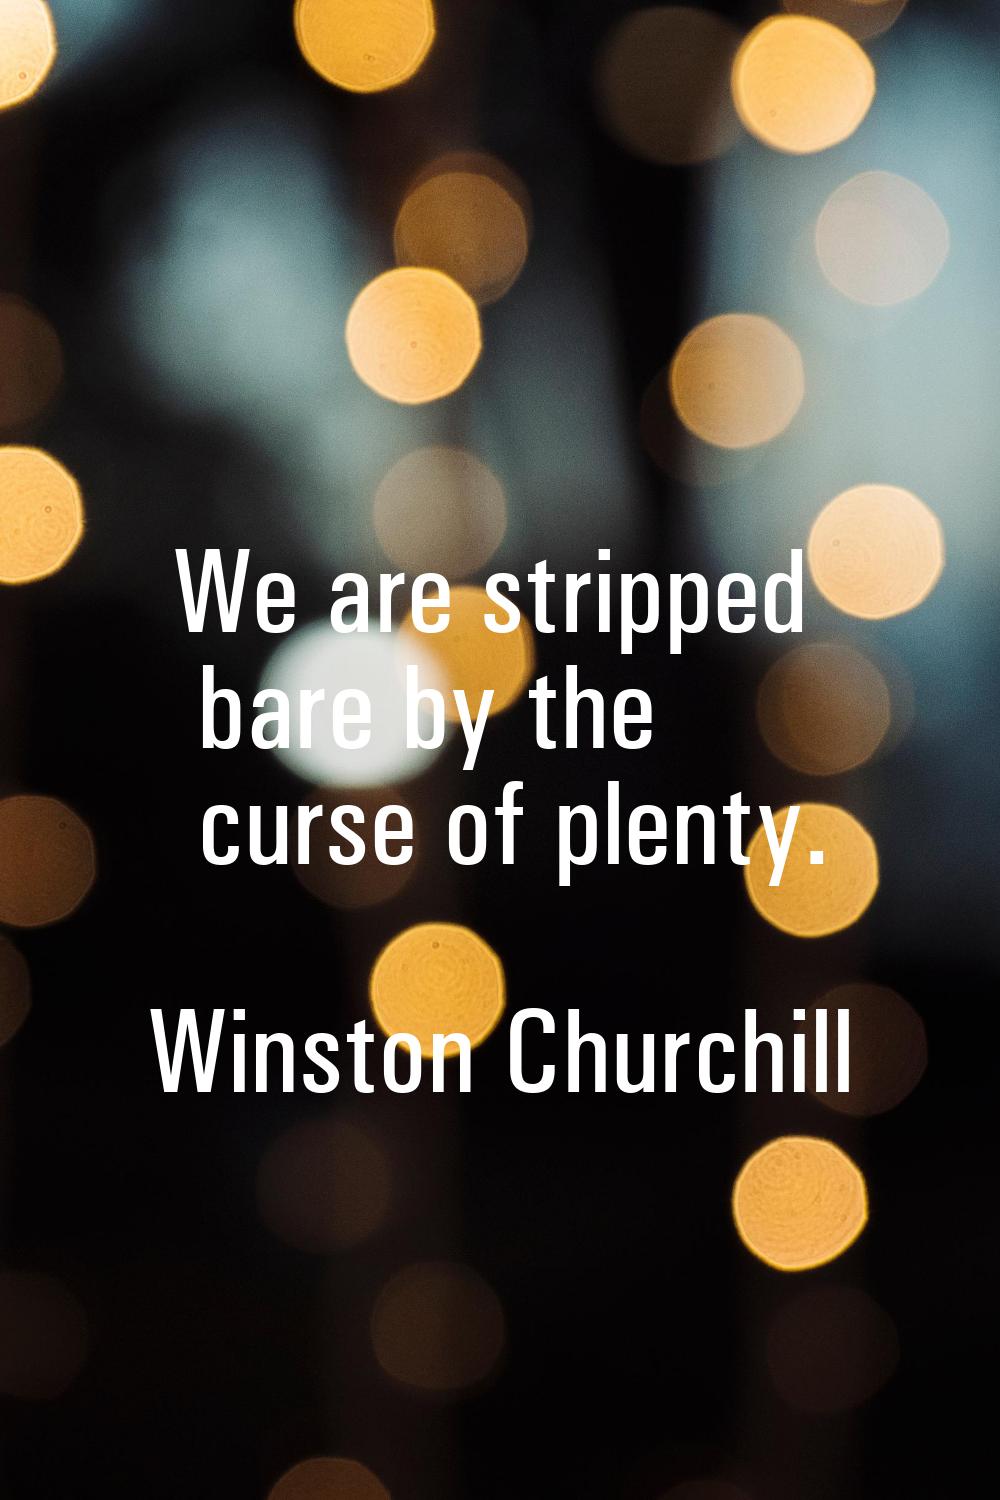 We are stripped bare by the curse of plenty.